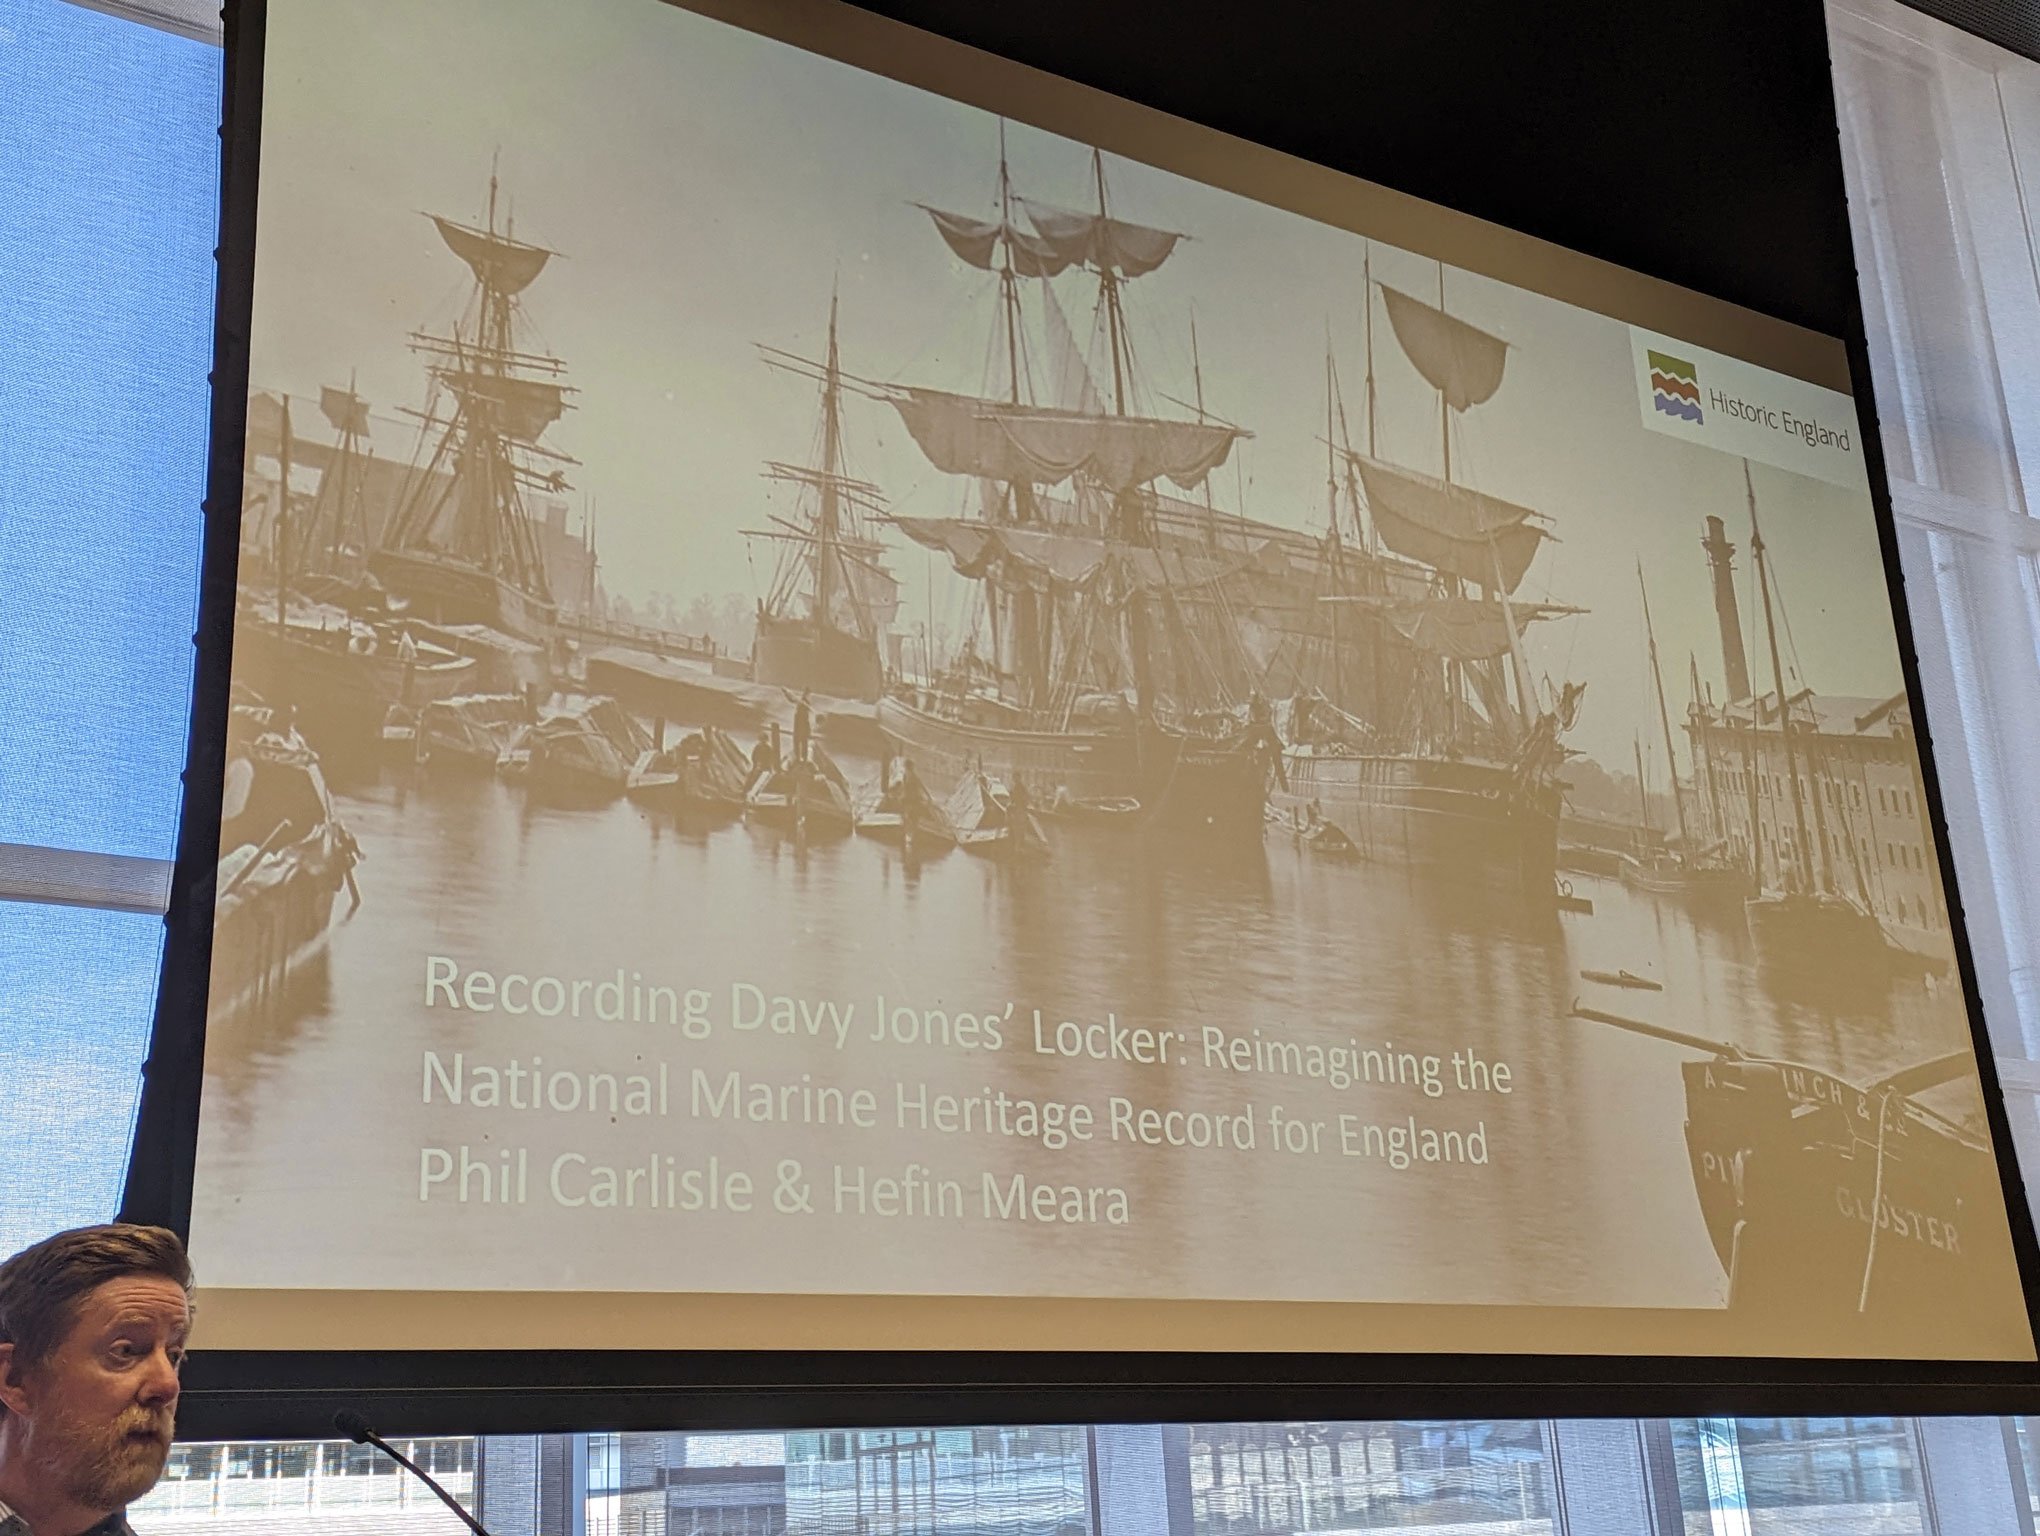 Photograph of a man presenting at a conference, he is standing in front of a screen upon which is projected an archive image of a harbour with sailing vessels.